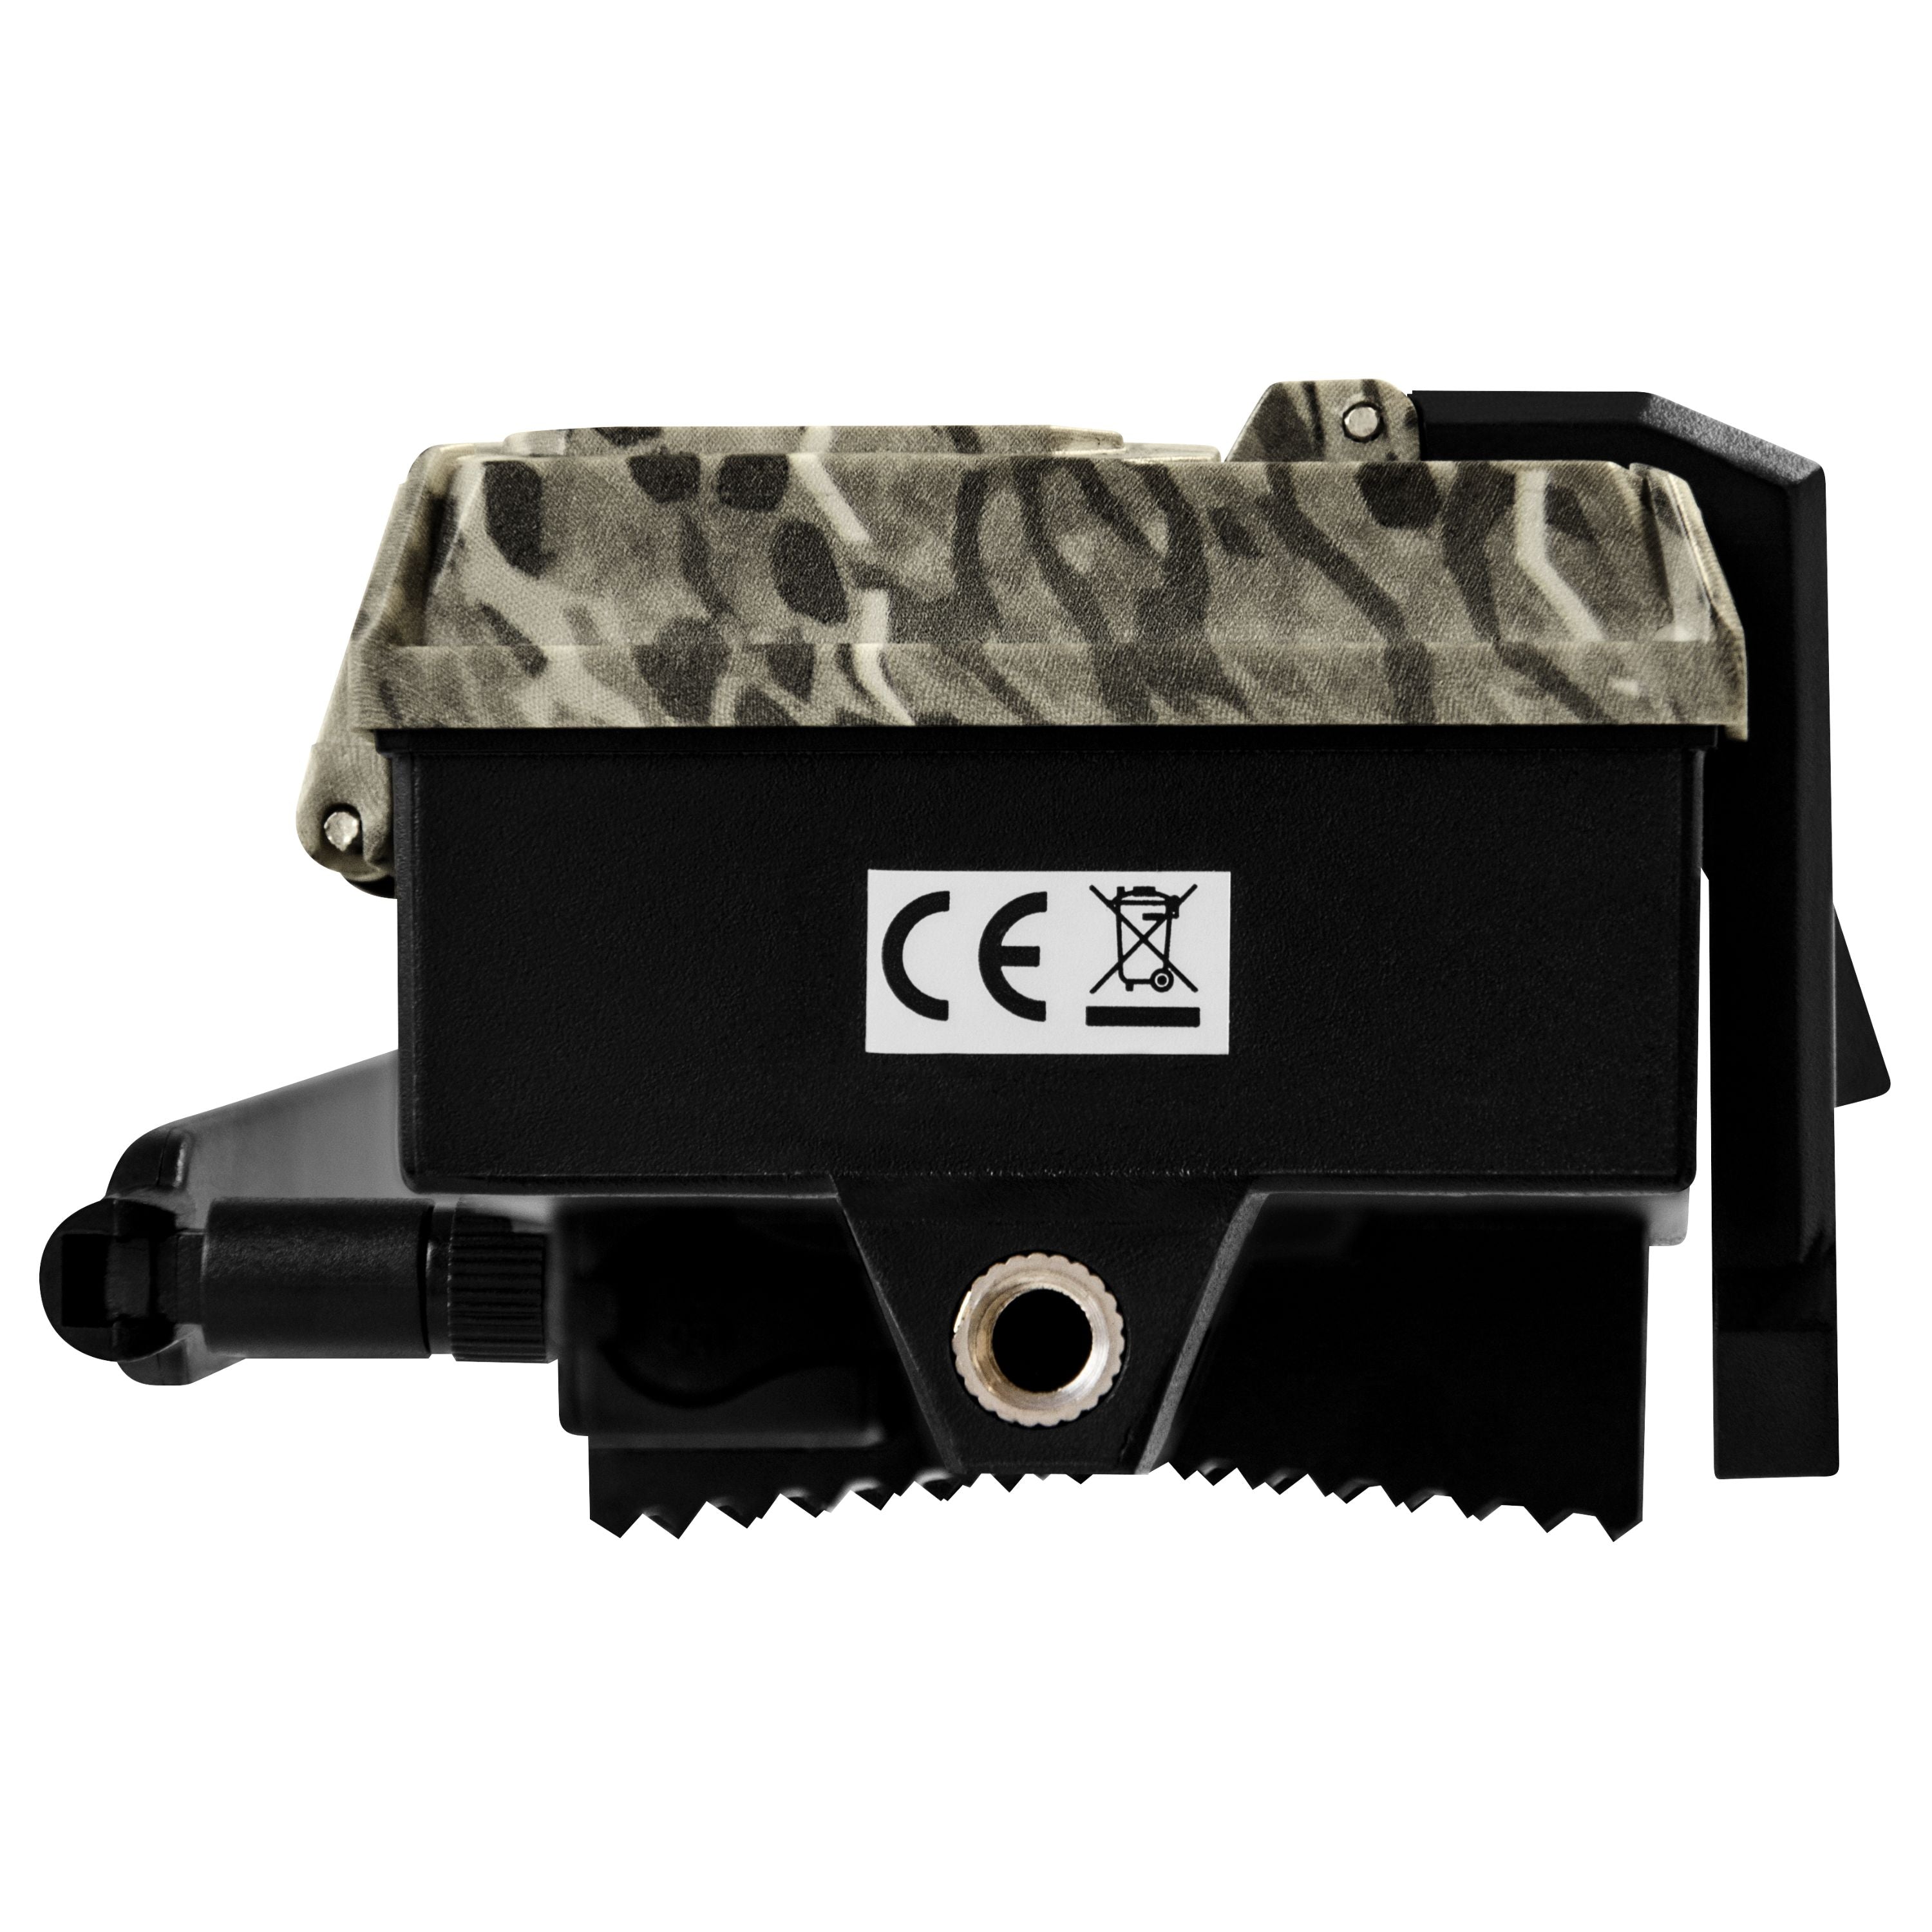 Cellular trail camera with solar panel